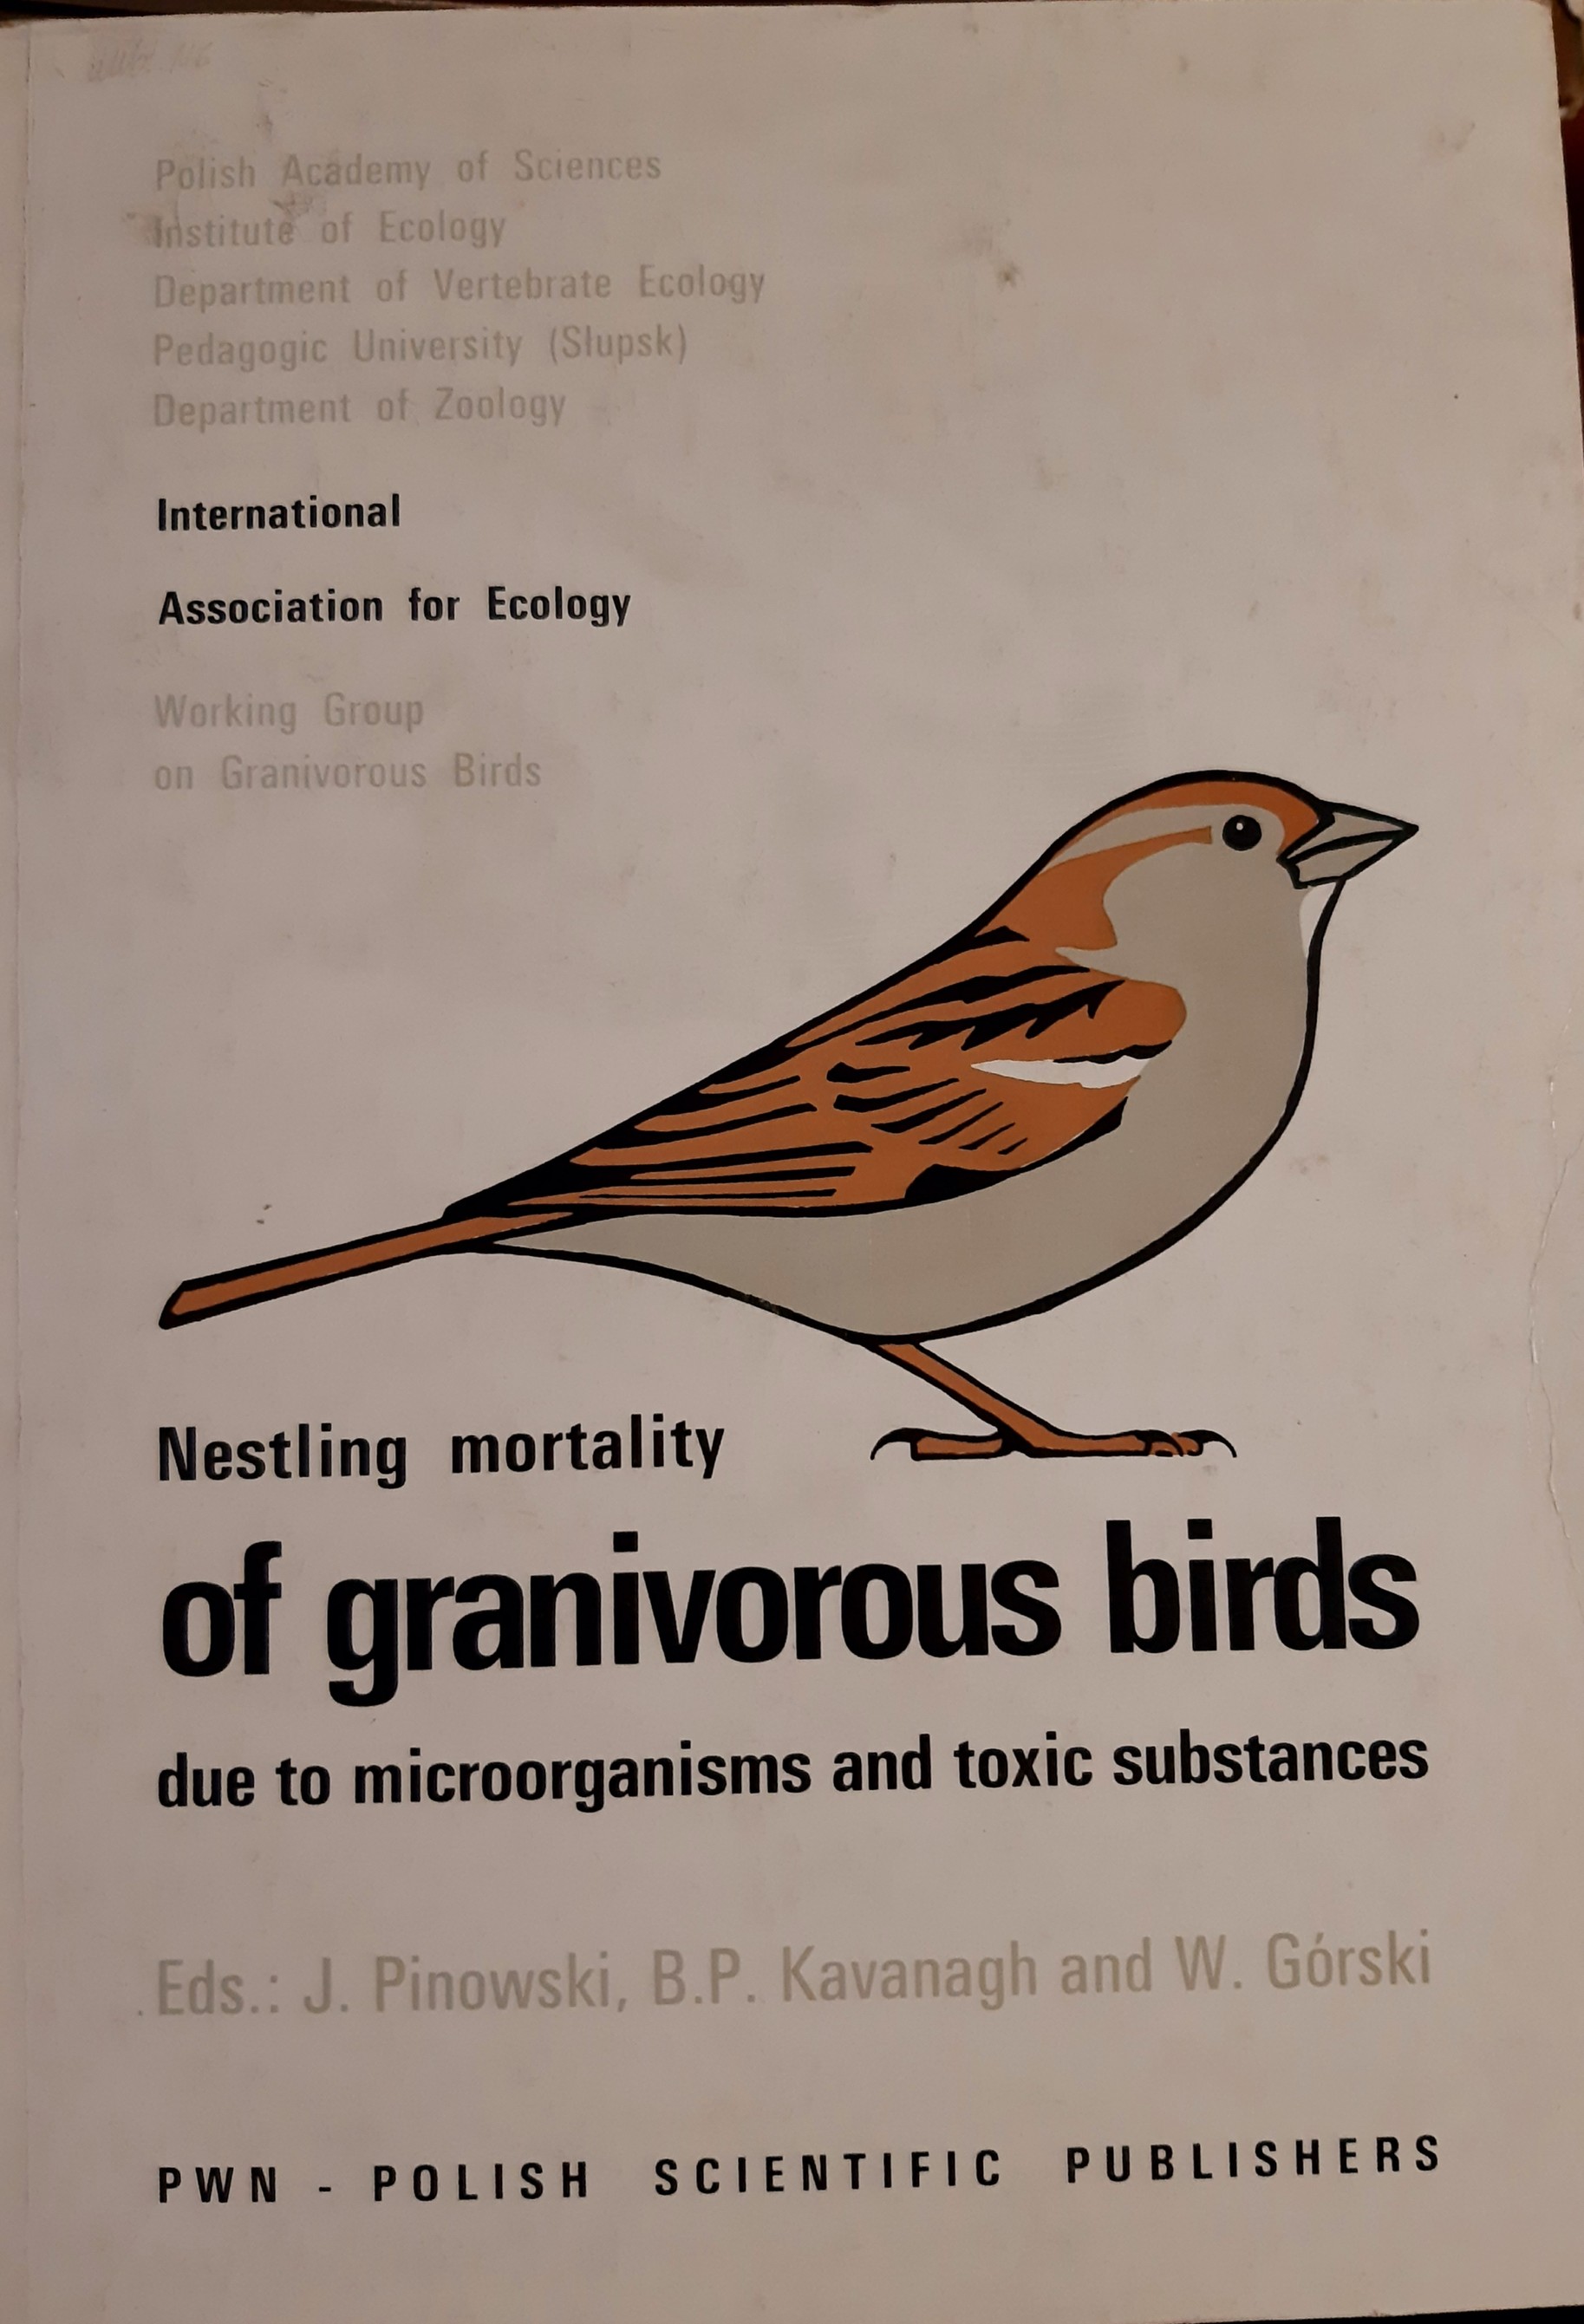 Nestling mortality of granivorous birds due to microorganisms and toxic substances (Rippl-Rónai Múzeum CC BY-NC-ND)